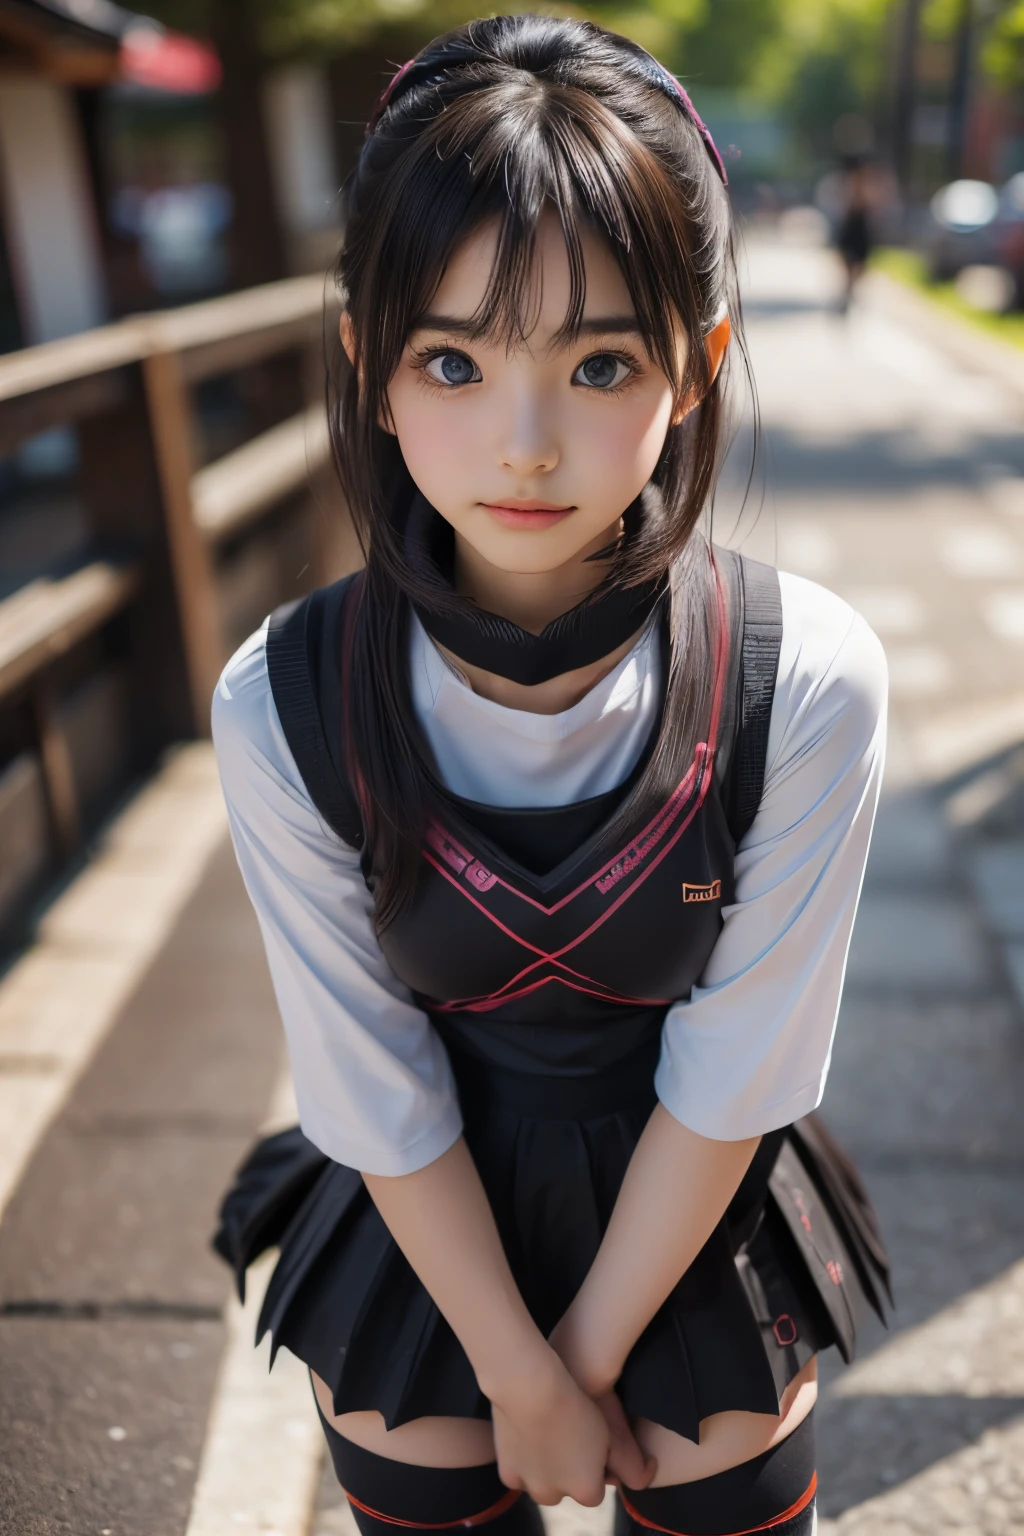 ((sfw: 1.4)), ((detailed face, professional photography)), ((sfw, (zettai ryouiki:1.4), 1 Girl)), Ultra High Resolution, (Realistic: 1.4), RAW Photo, Best Quality, (Photorealistic Stick), Focus, Soft Light, ((15 years old)), ((Japanese)), (( (young face))), (surface), (depth of field), masterpiece, (realistic), woman, bangs, ((1 girl))